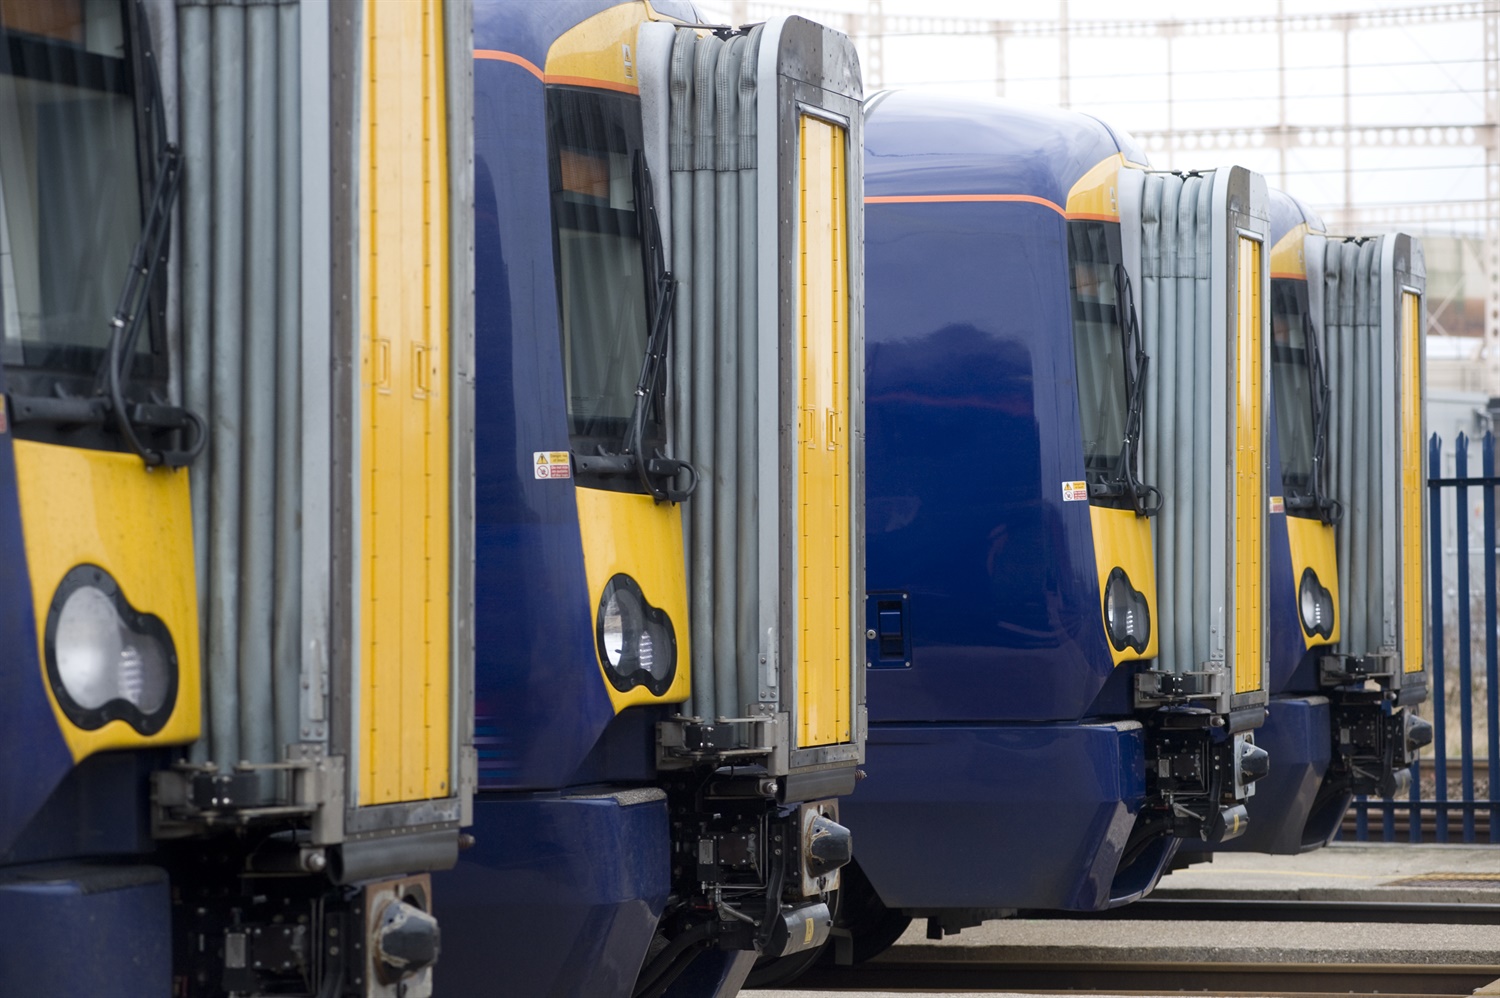 New online database for GB rolling stock to launch this year